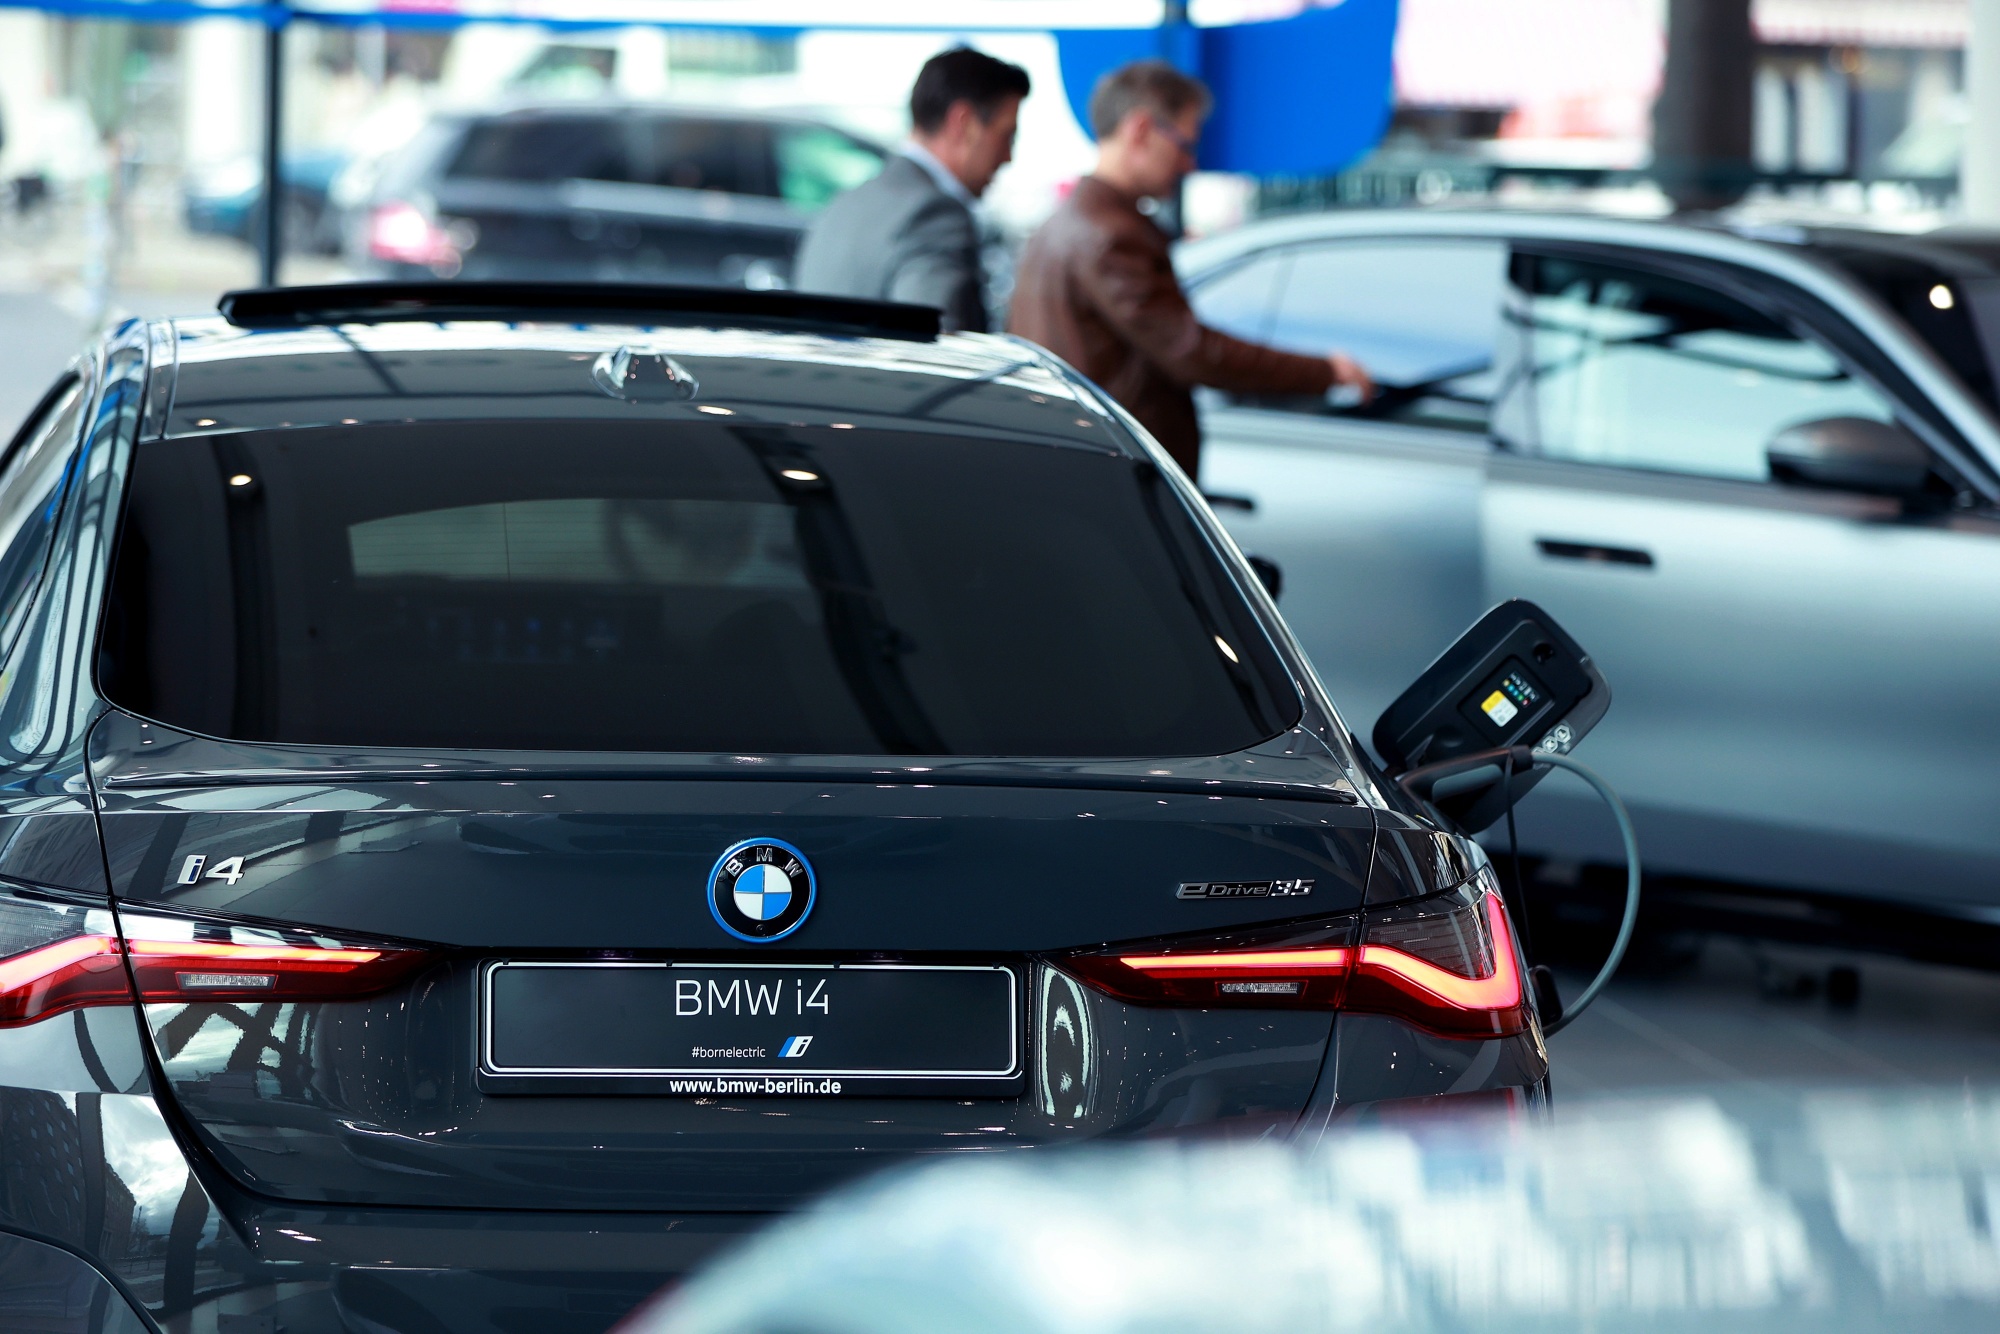 BMW, Tesla And Other Used Electric Cars Are Proving Tough To Sell